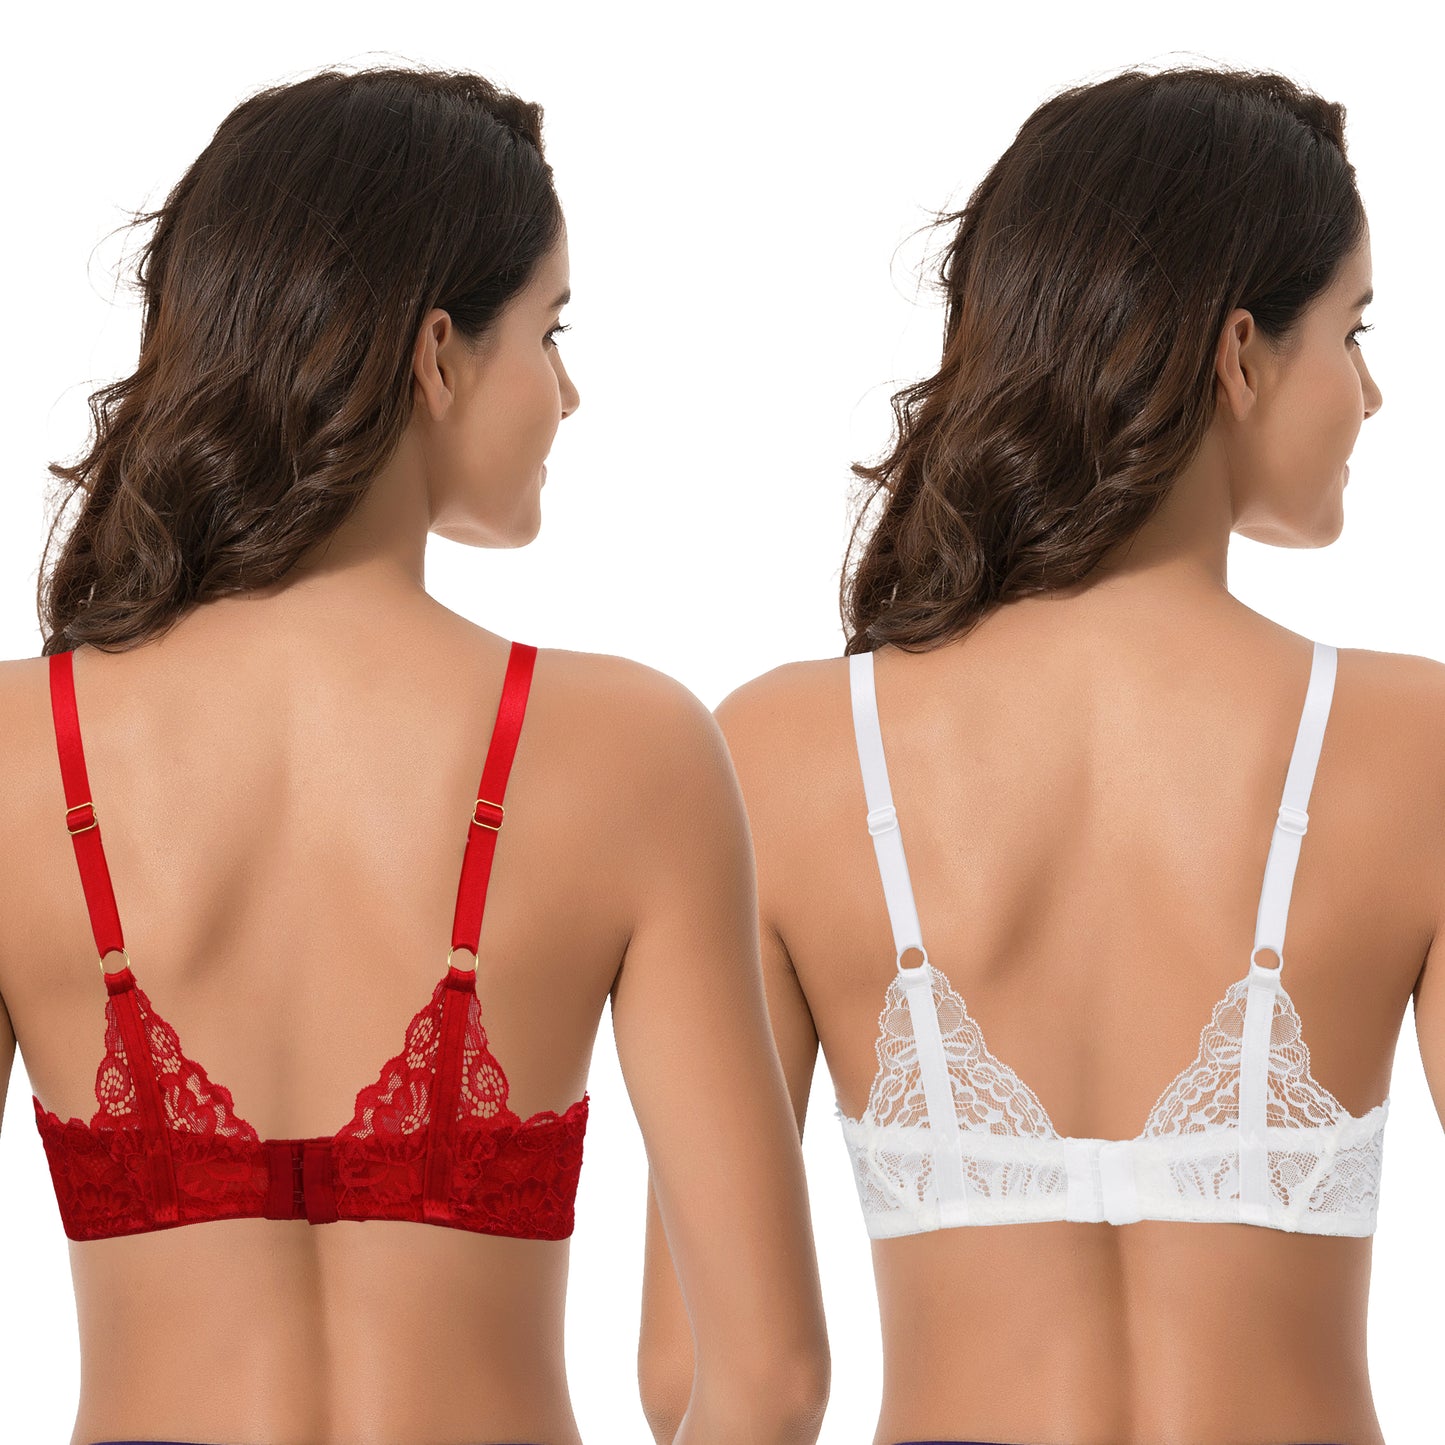 Women's Plus Size Push Up Add 1 Cup Underwire Perfect Shape Tshirt Bra-2PK-WHITE,RED